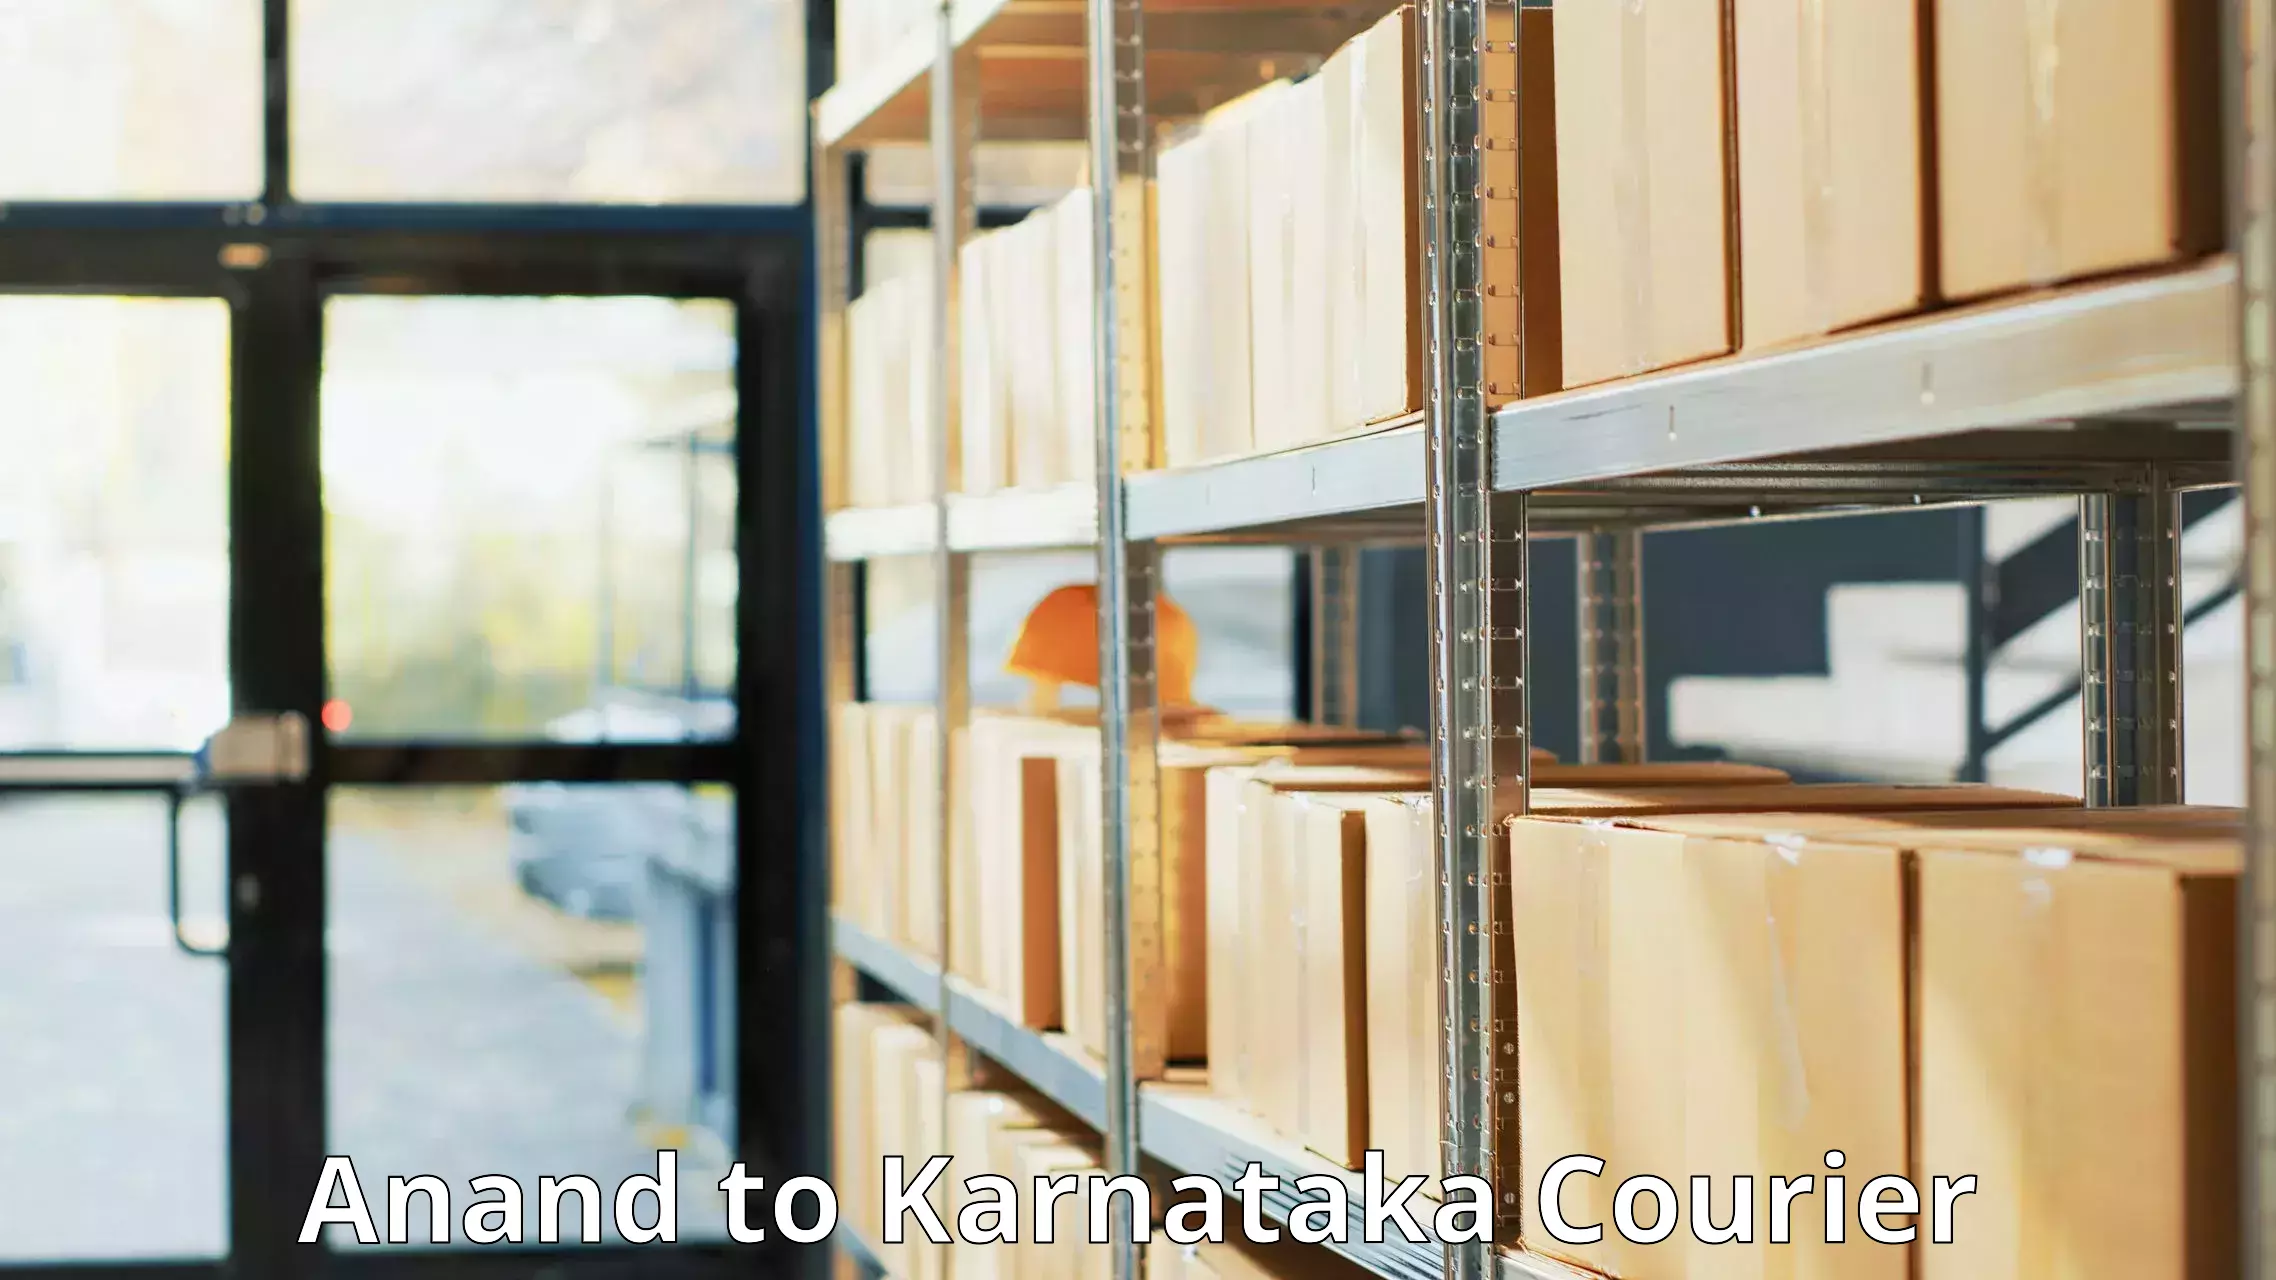 High-capacity parcel service Anand to Kotturu